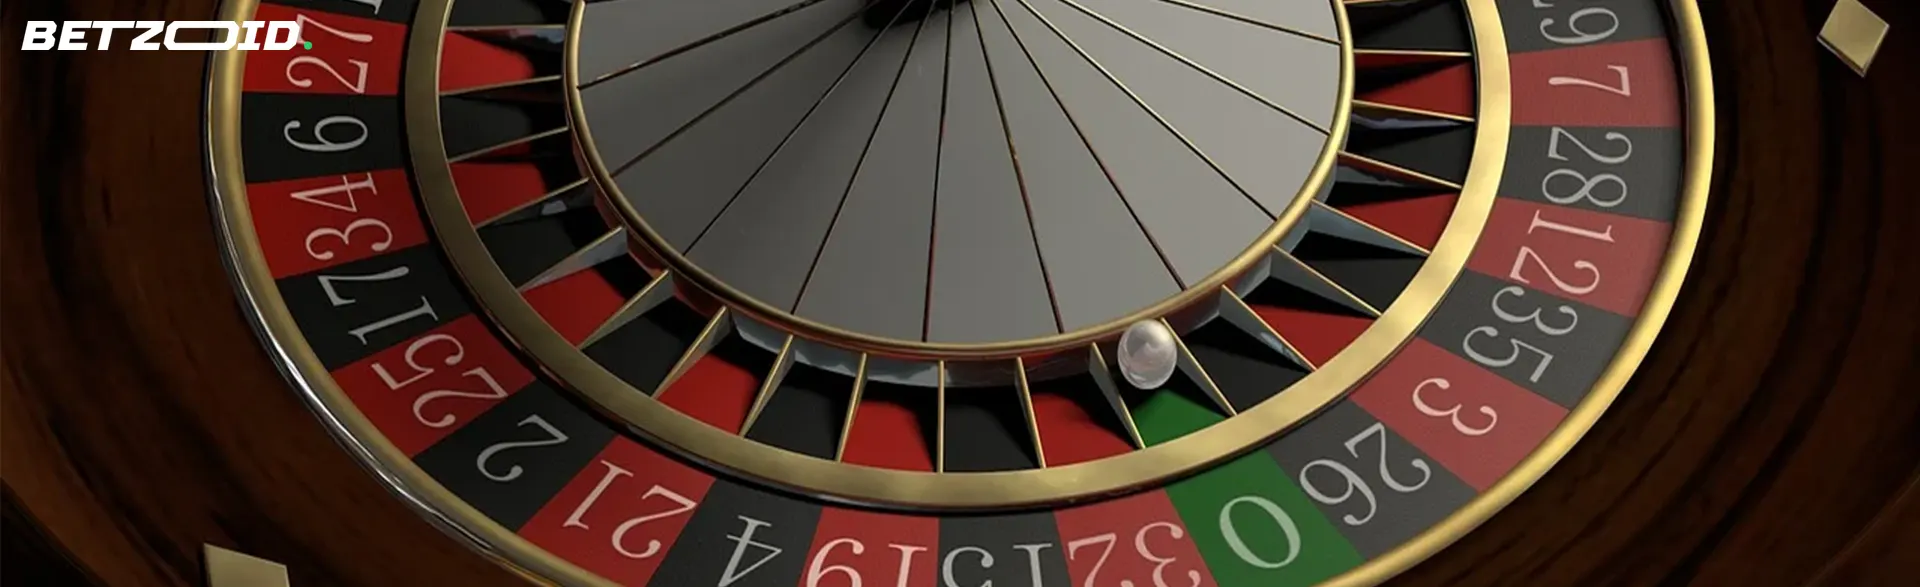 Close-up view of a casino roulette wheel with alternating red and black numbered slots and a white ball resting in one section.